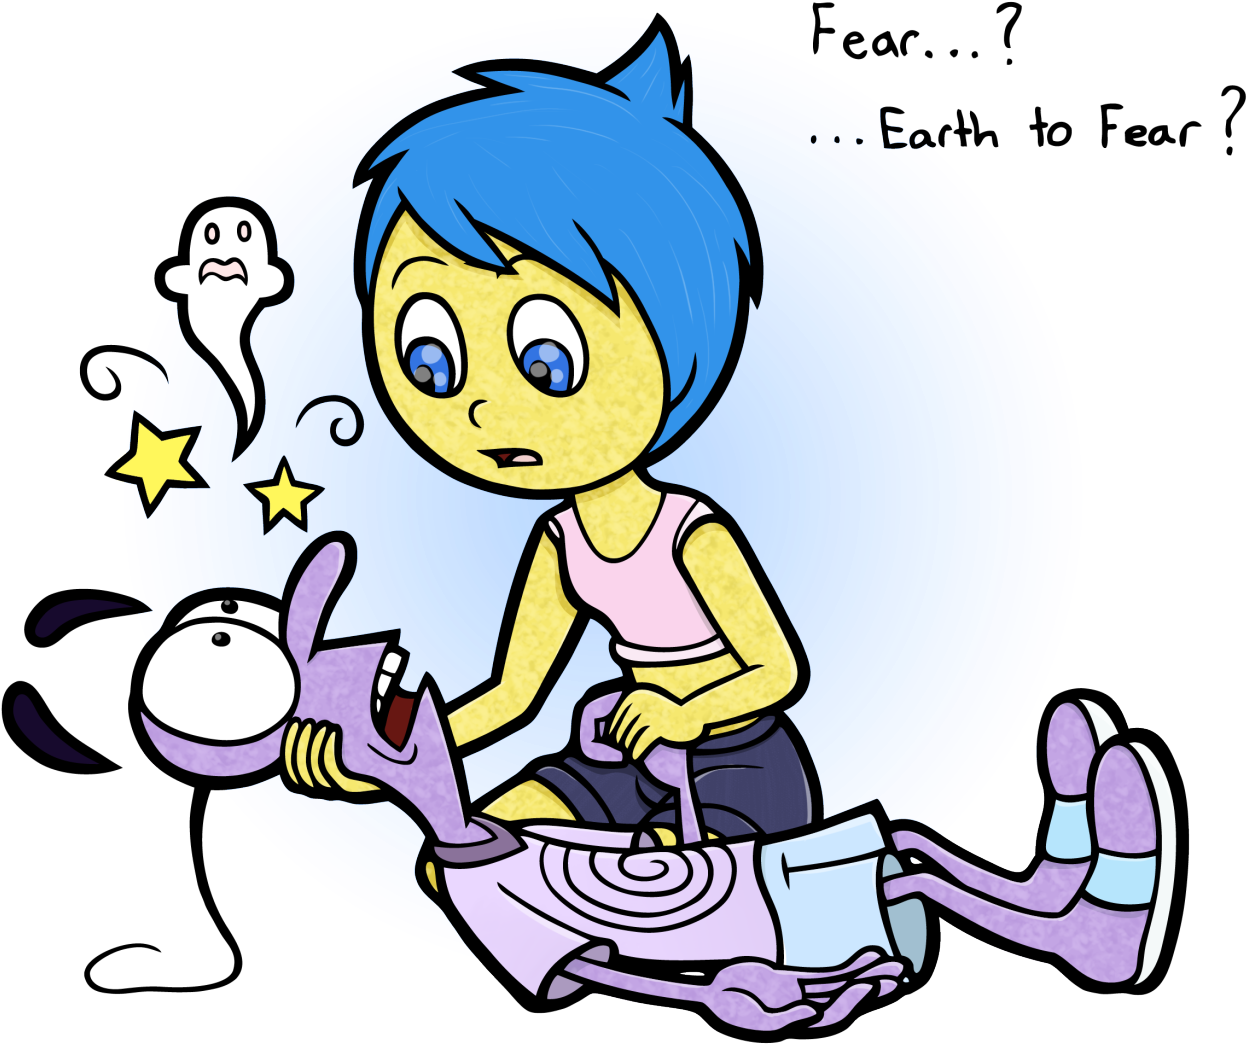 A Cartoon Of A Girl With Blue Hair And A Purple Robot